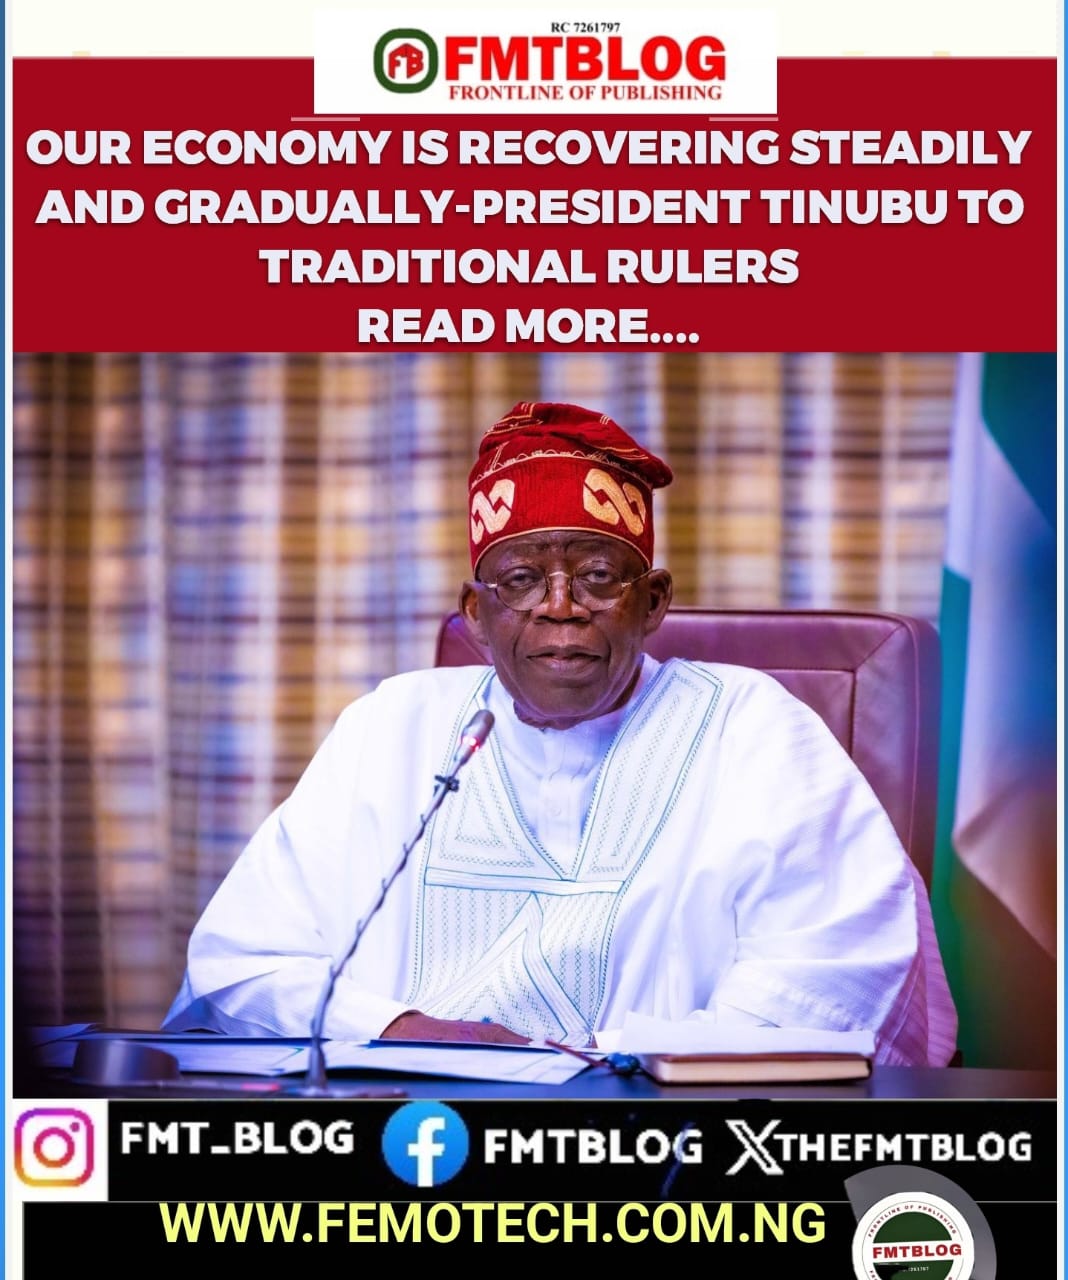 Our Economy Is Recovering Steadily And Gradually- President Tinubu Tells Traditional Rulers.